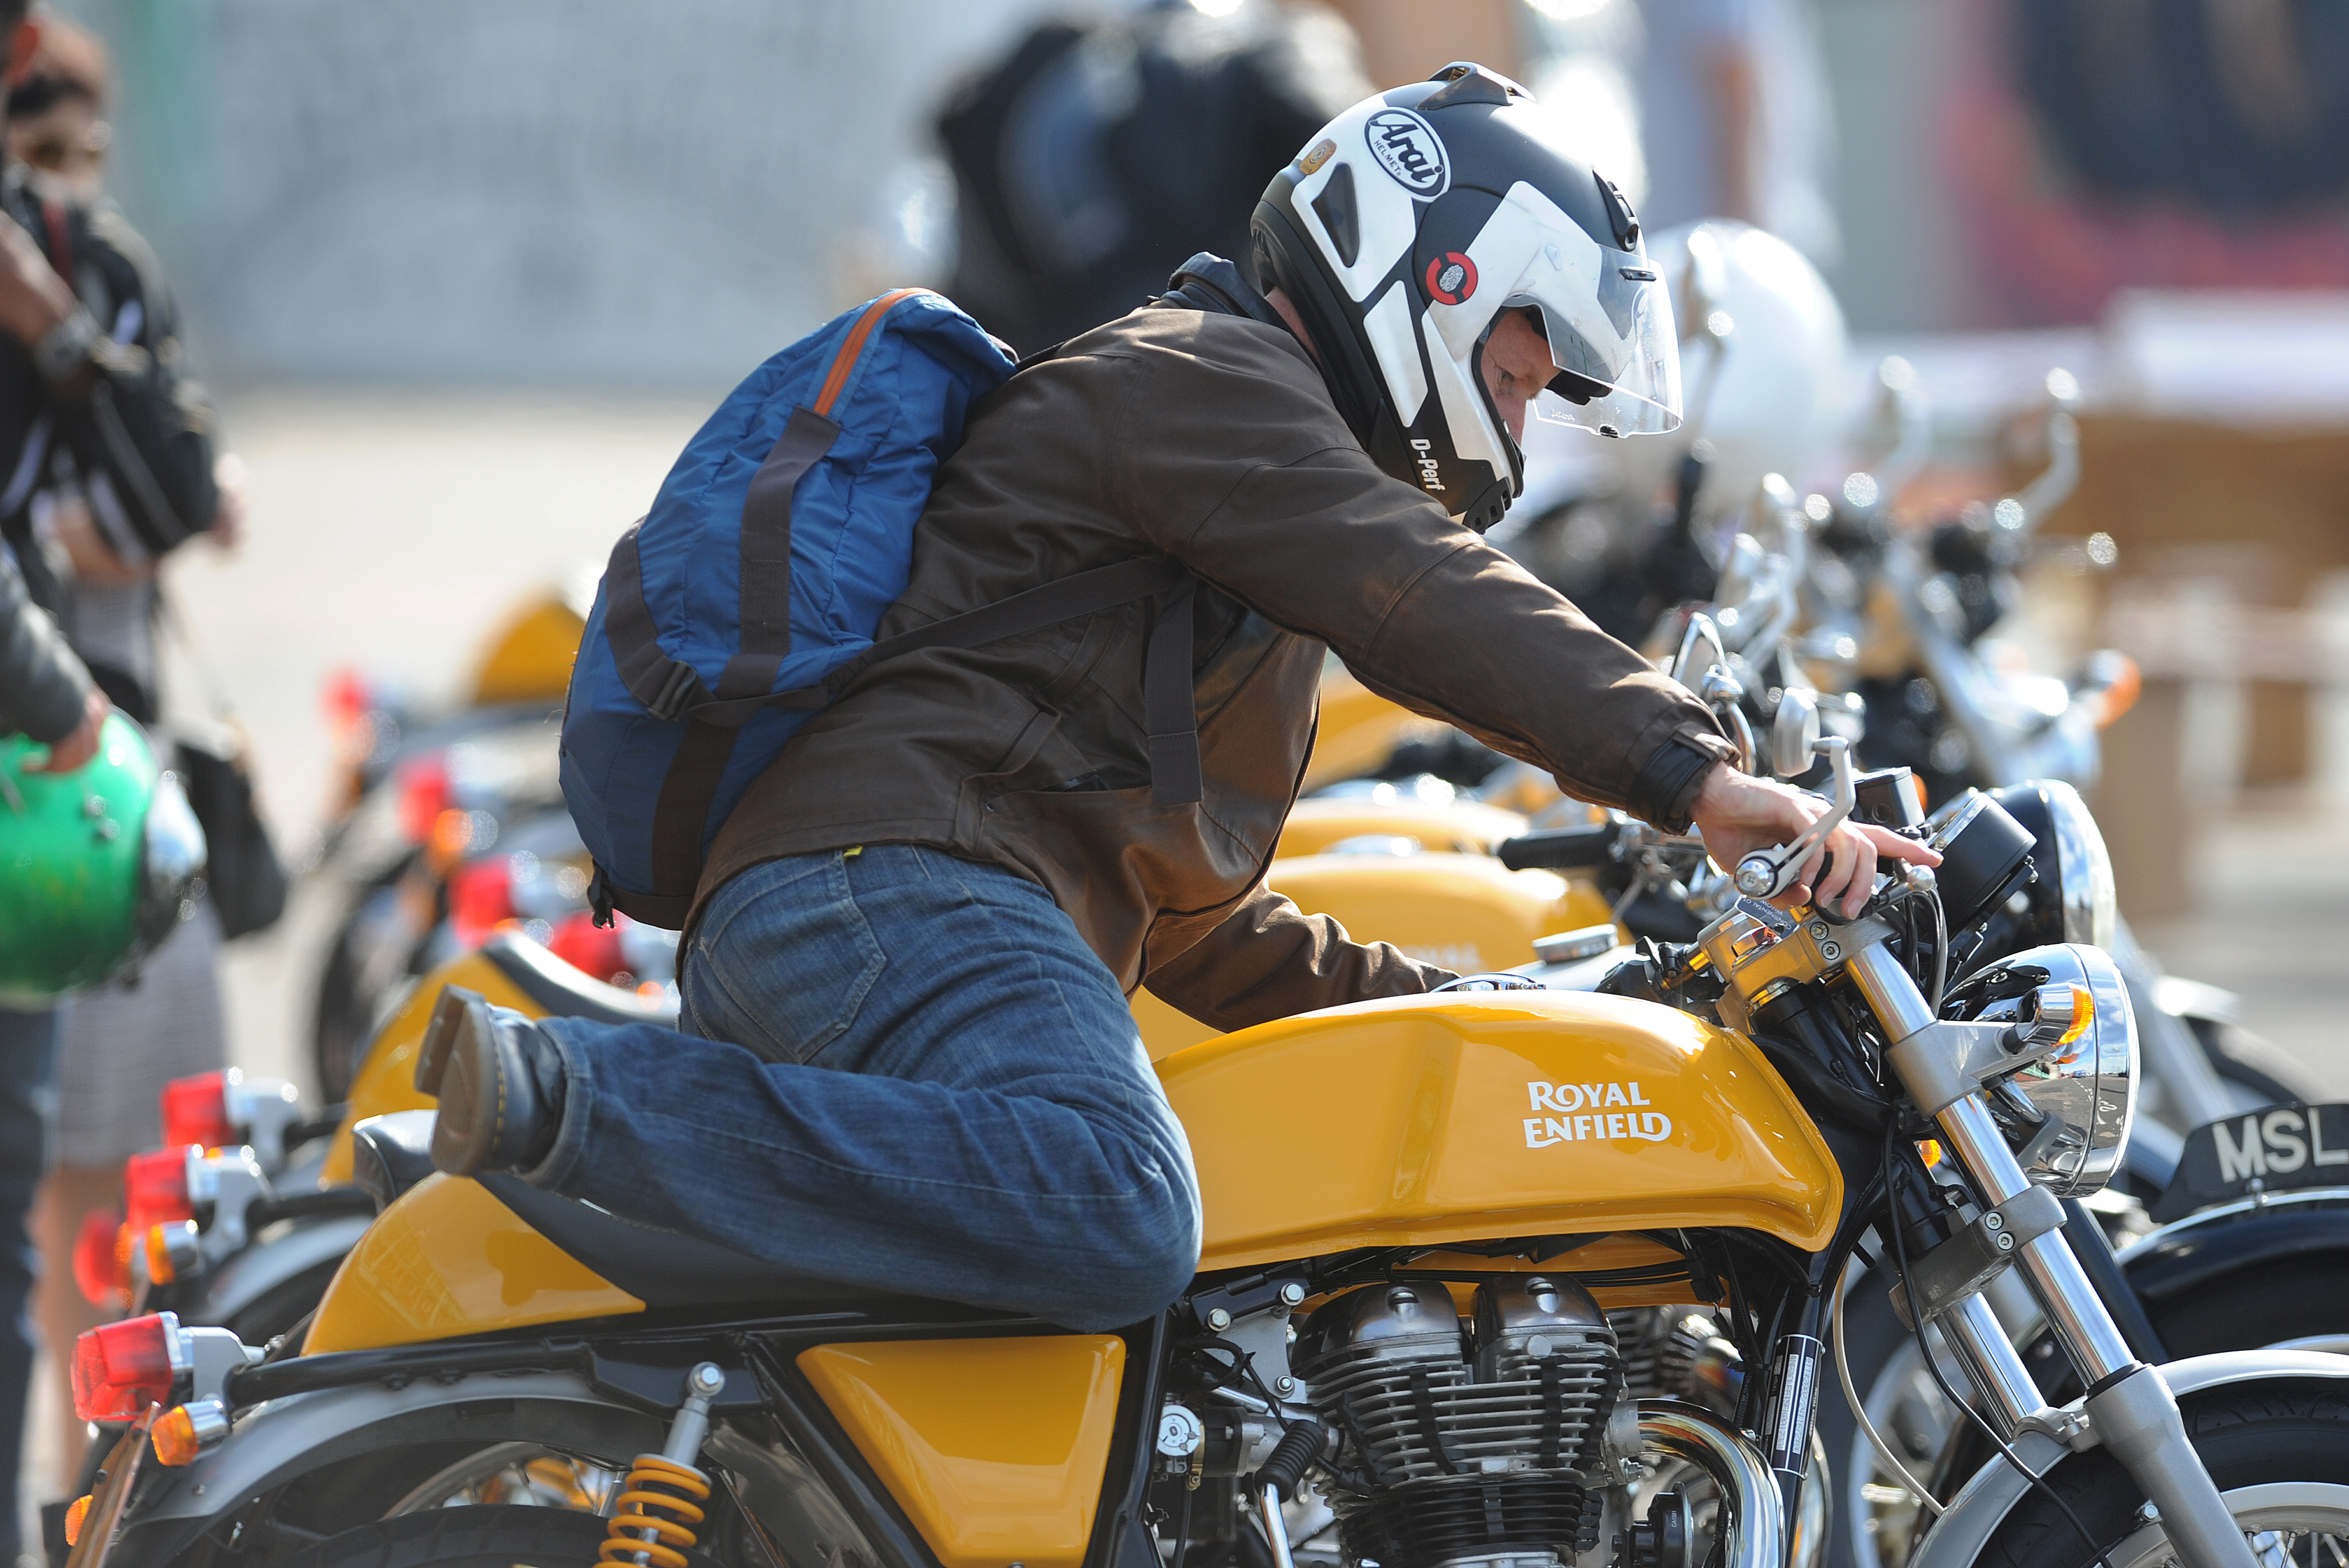 Road test: Royal Enfield Continental GT review